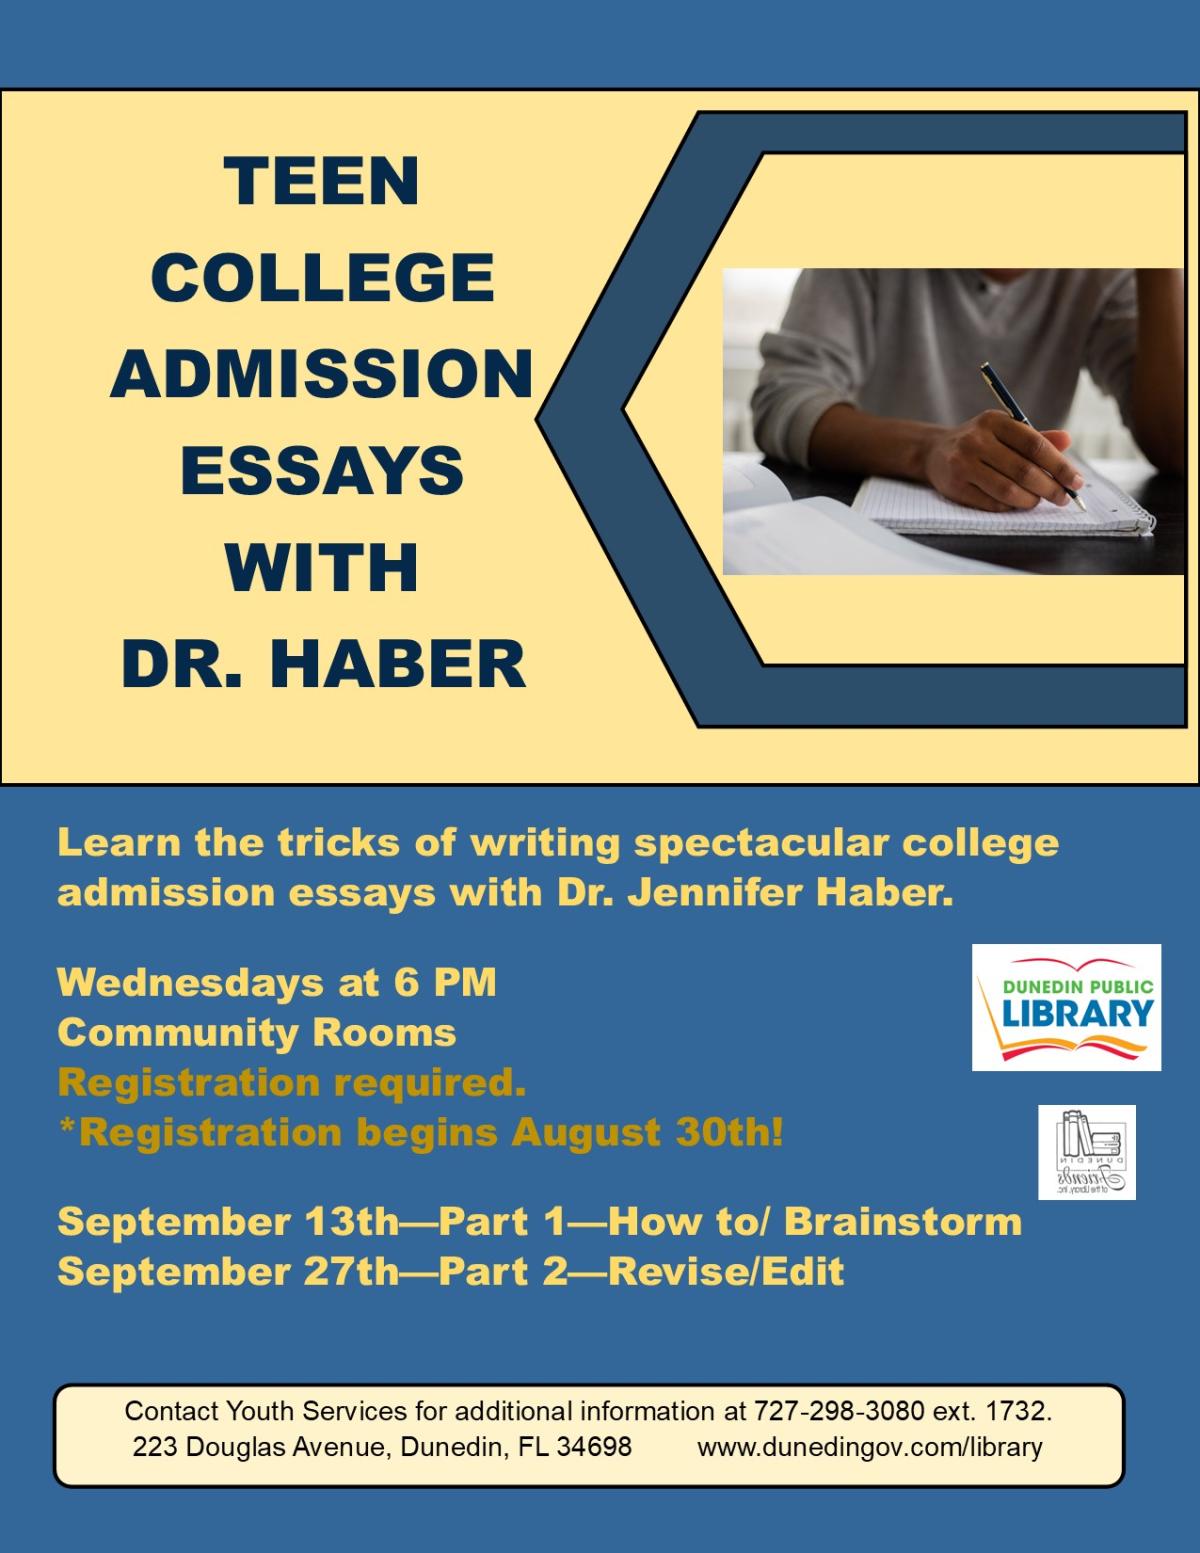 College Admission Essays with Dr. Jennifer Haber.  Part 1 includes "How To," brainstorm and create your essay.